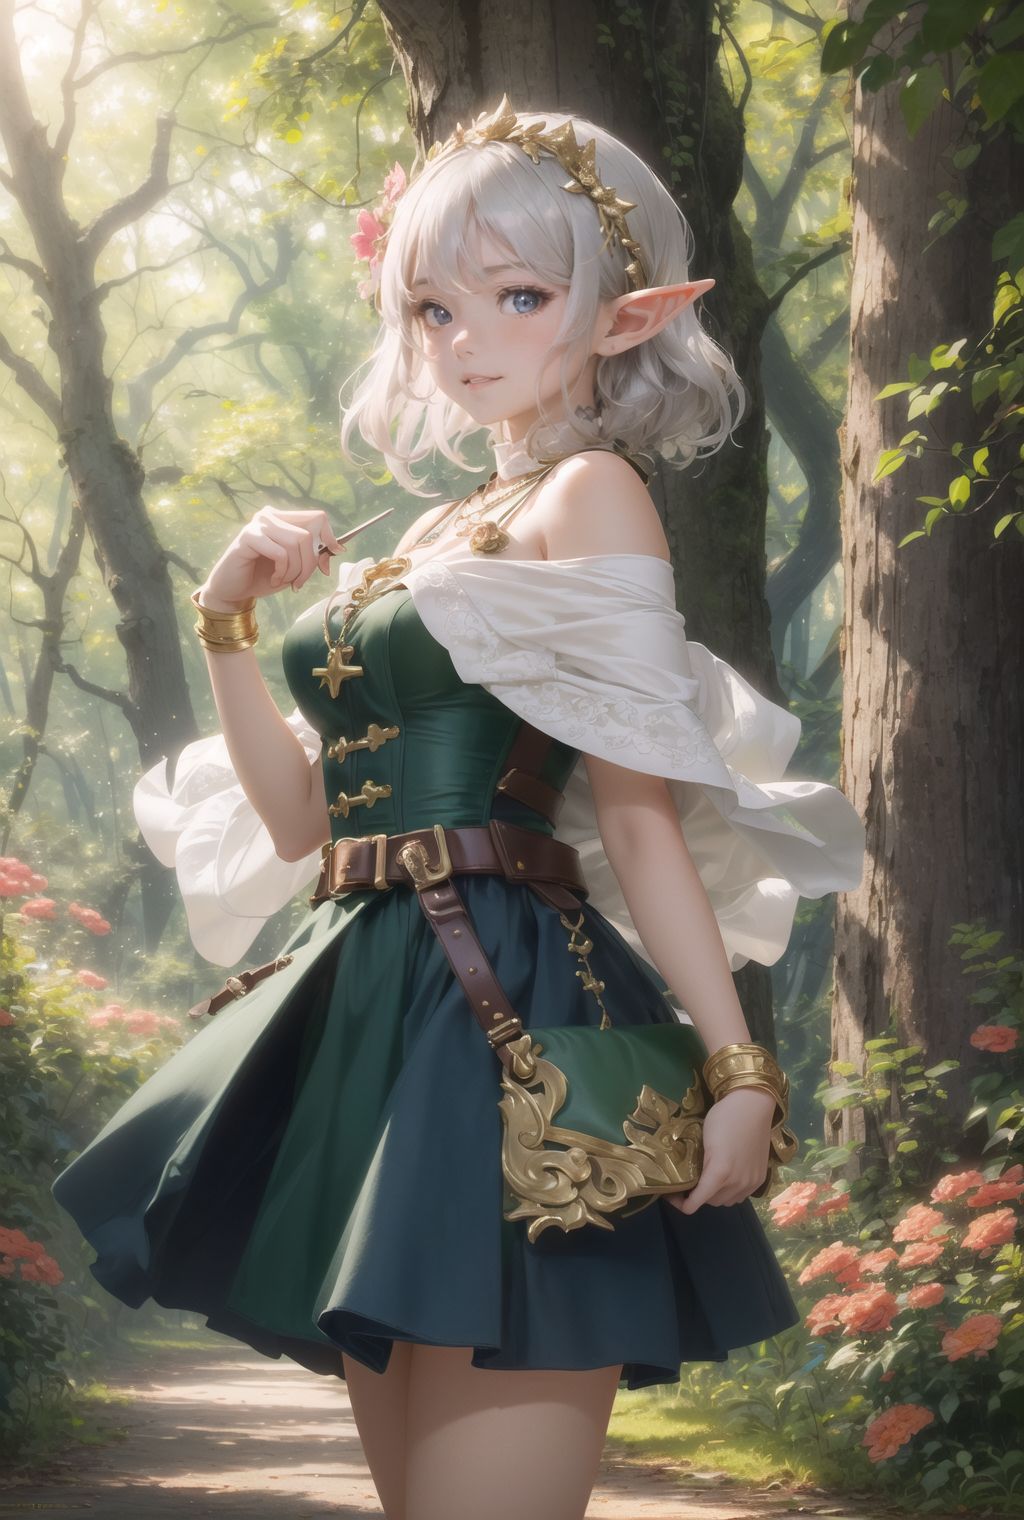 (Come on, let's paint this charming 16-year-old elf girl in detail! Represent her with more charm than flowers around her, and dedicate your time and effort to her:1.9), She smiles, raising corners of her mouth and showing a few front teeth, with pouty lips and slightly drooping eyes epitomizing cuteness. She is an attractive 16-year-old elf warrior girl in Japanese anime style, standing in a lush, enchanted forest at dawn. She stands bravely with a long sword at her back. The setting is a dense forest with towering trees and shafts of morning sunlight filtering through the canopy, casting a magical glow. Her expression is one of determination and courage, with silver hair and elven features contrasting with the vibrant greens and browns of the forest. She is poised and graceful in her luxurious armor, which gleams in the morning light. She has an idol-like kawaii face:1.5, with dark green eyes, and silver hair in a stylish short cut with a delicate flow:1.6. She wears a silver hairpiece, green blouse with a ruffled neckline, brown corset top with gold cross-stitching, dark brown underbust corset with gold buckles, emerald green cape with a gold brooch shoulder clasp, leaf-shaped shoulder straps with gold trim, green fabric wrist cuffs, a forest green multi-layered skirt with gold trim, leather utility belt with a pouch, brown folding boots, and contrasting dark and light green accessories. She also has a necklace, bracelet, and an intricate gold armband on her upper arm. Her stance is powerful and brave, yet youthful and graceful, embodying the ideal blend of innocence and glamour. A low angle emphasizes her cuteness and highlights the delicate textures of her hair and clothing. Natural light casts soft shadows and highlights the youthful contours of her face, bringing her into sharp focus. The shallow depth of field of the 50mm f/1.2 lens creates a beautiful depth-of-field blur that keeps her face in focus, with high-resolution, detailed graphics, vibrant colors, and professional quality. Ultra-high resolution captures every detail, from individual strands of hair to the intricate fabric of her costume. Professional clarity and contrast bring vibrant colors to life.